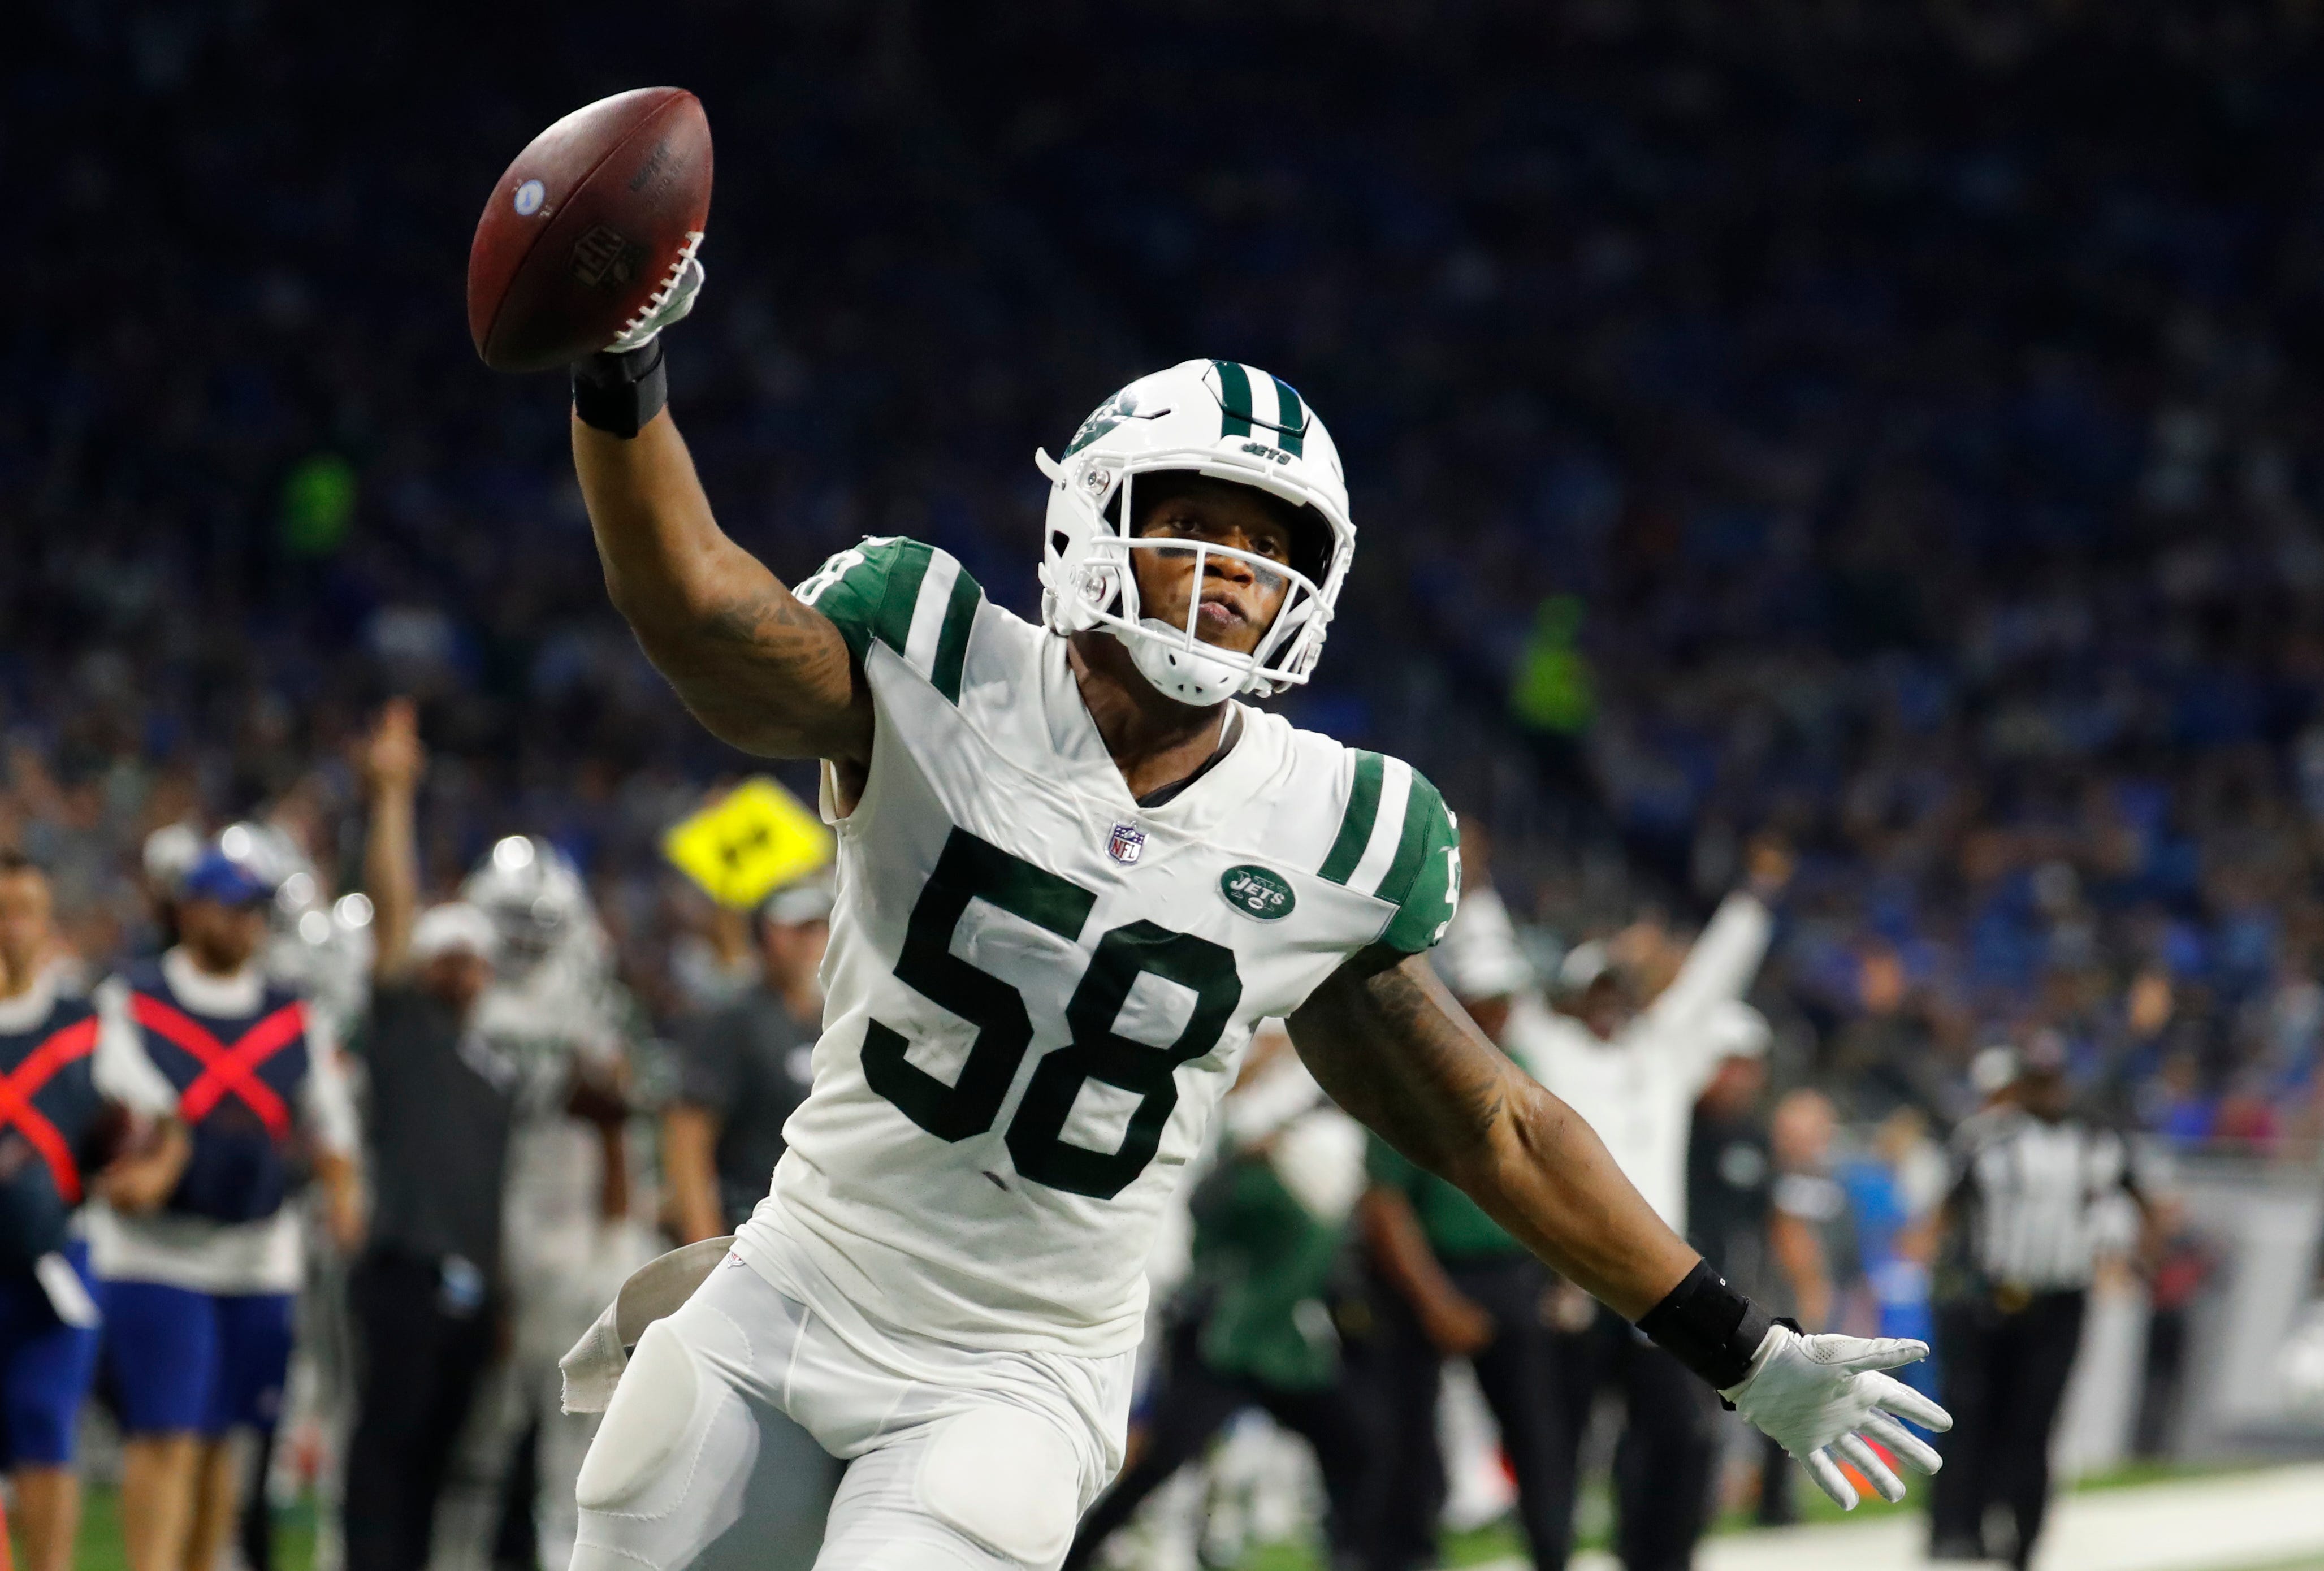 Darron Lee suspended four games by NFL for substance abuse, season over with Jets